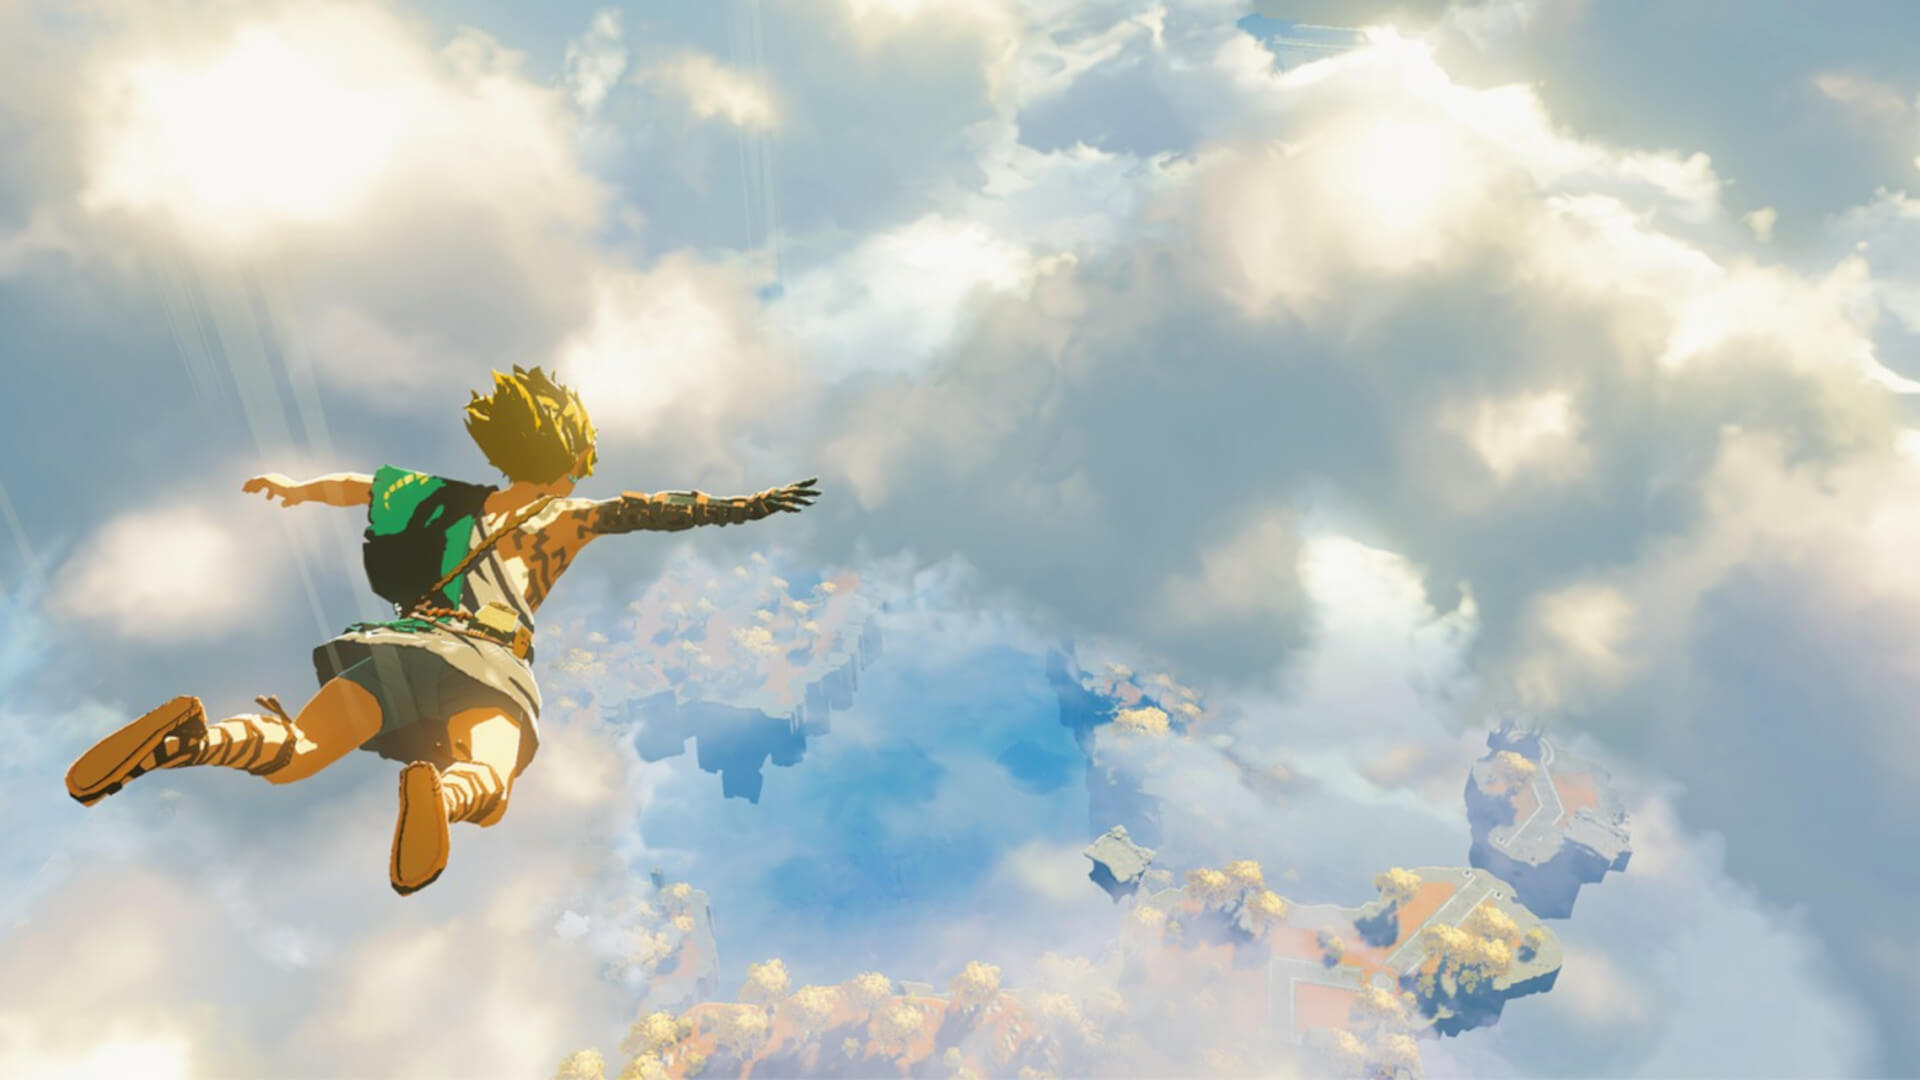 Link diving through the sky in the Breath of the Wild sequel